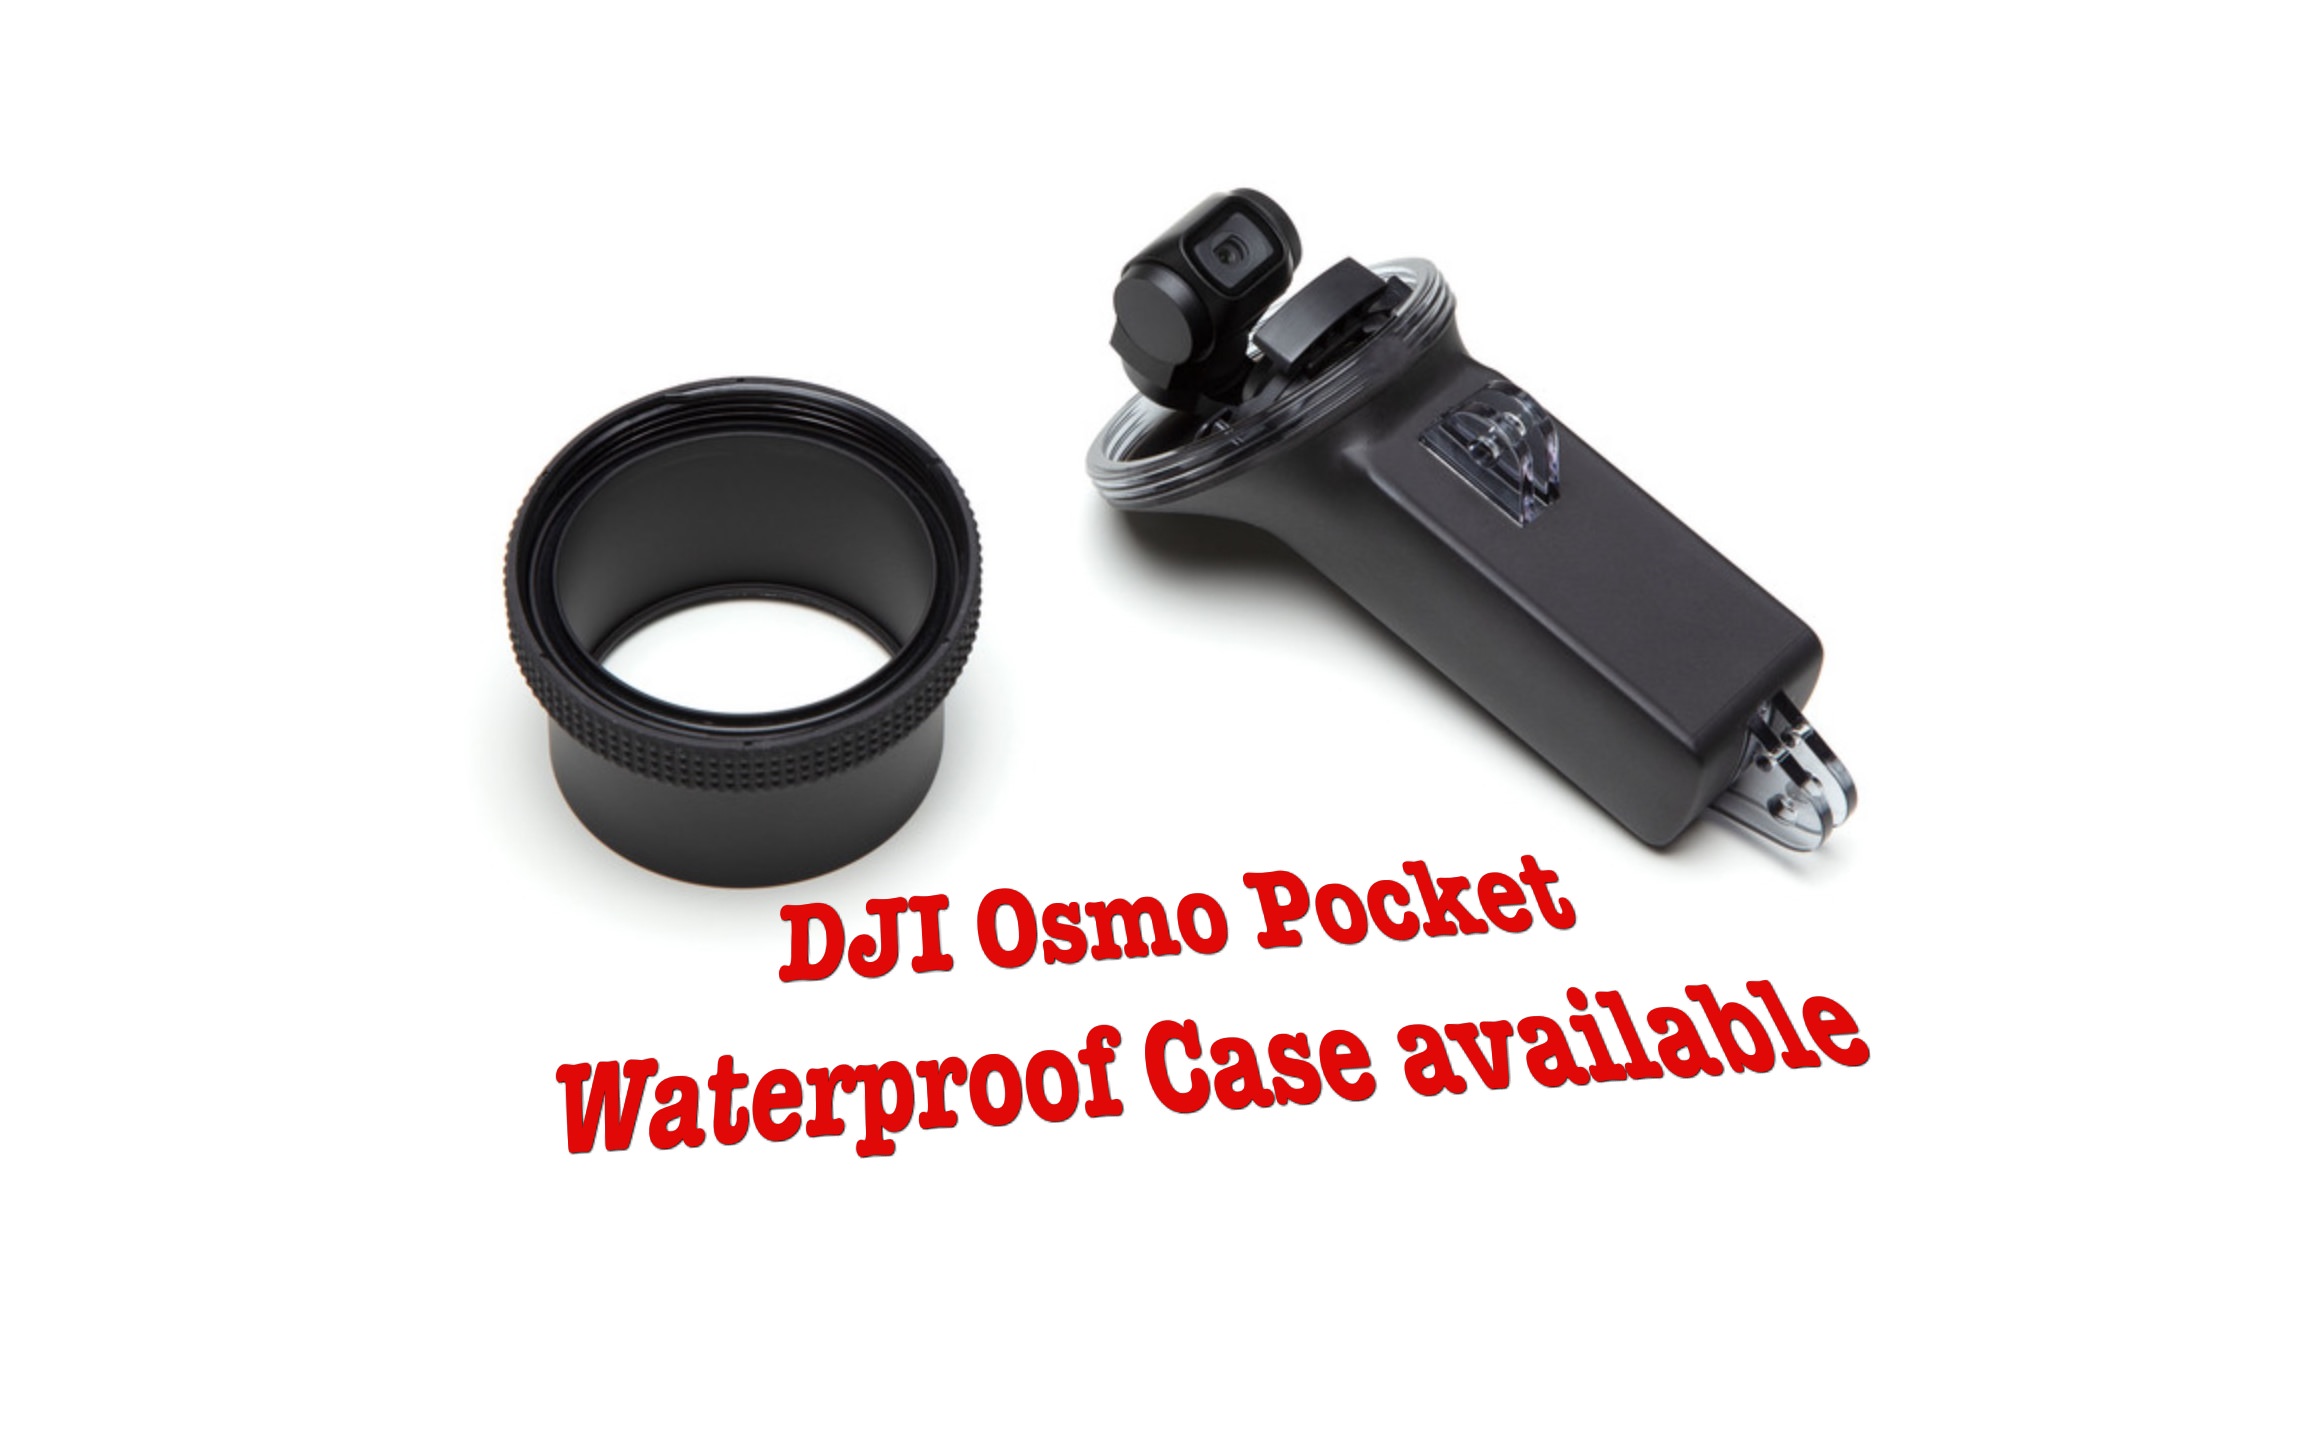 Fordi Først overholdelse DJI Osmo Pocket Waterproof case and accessories available - DroneDJ